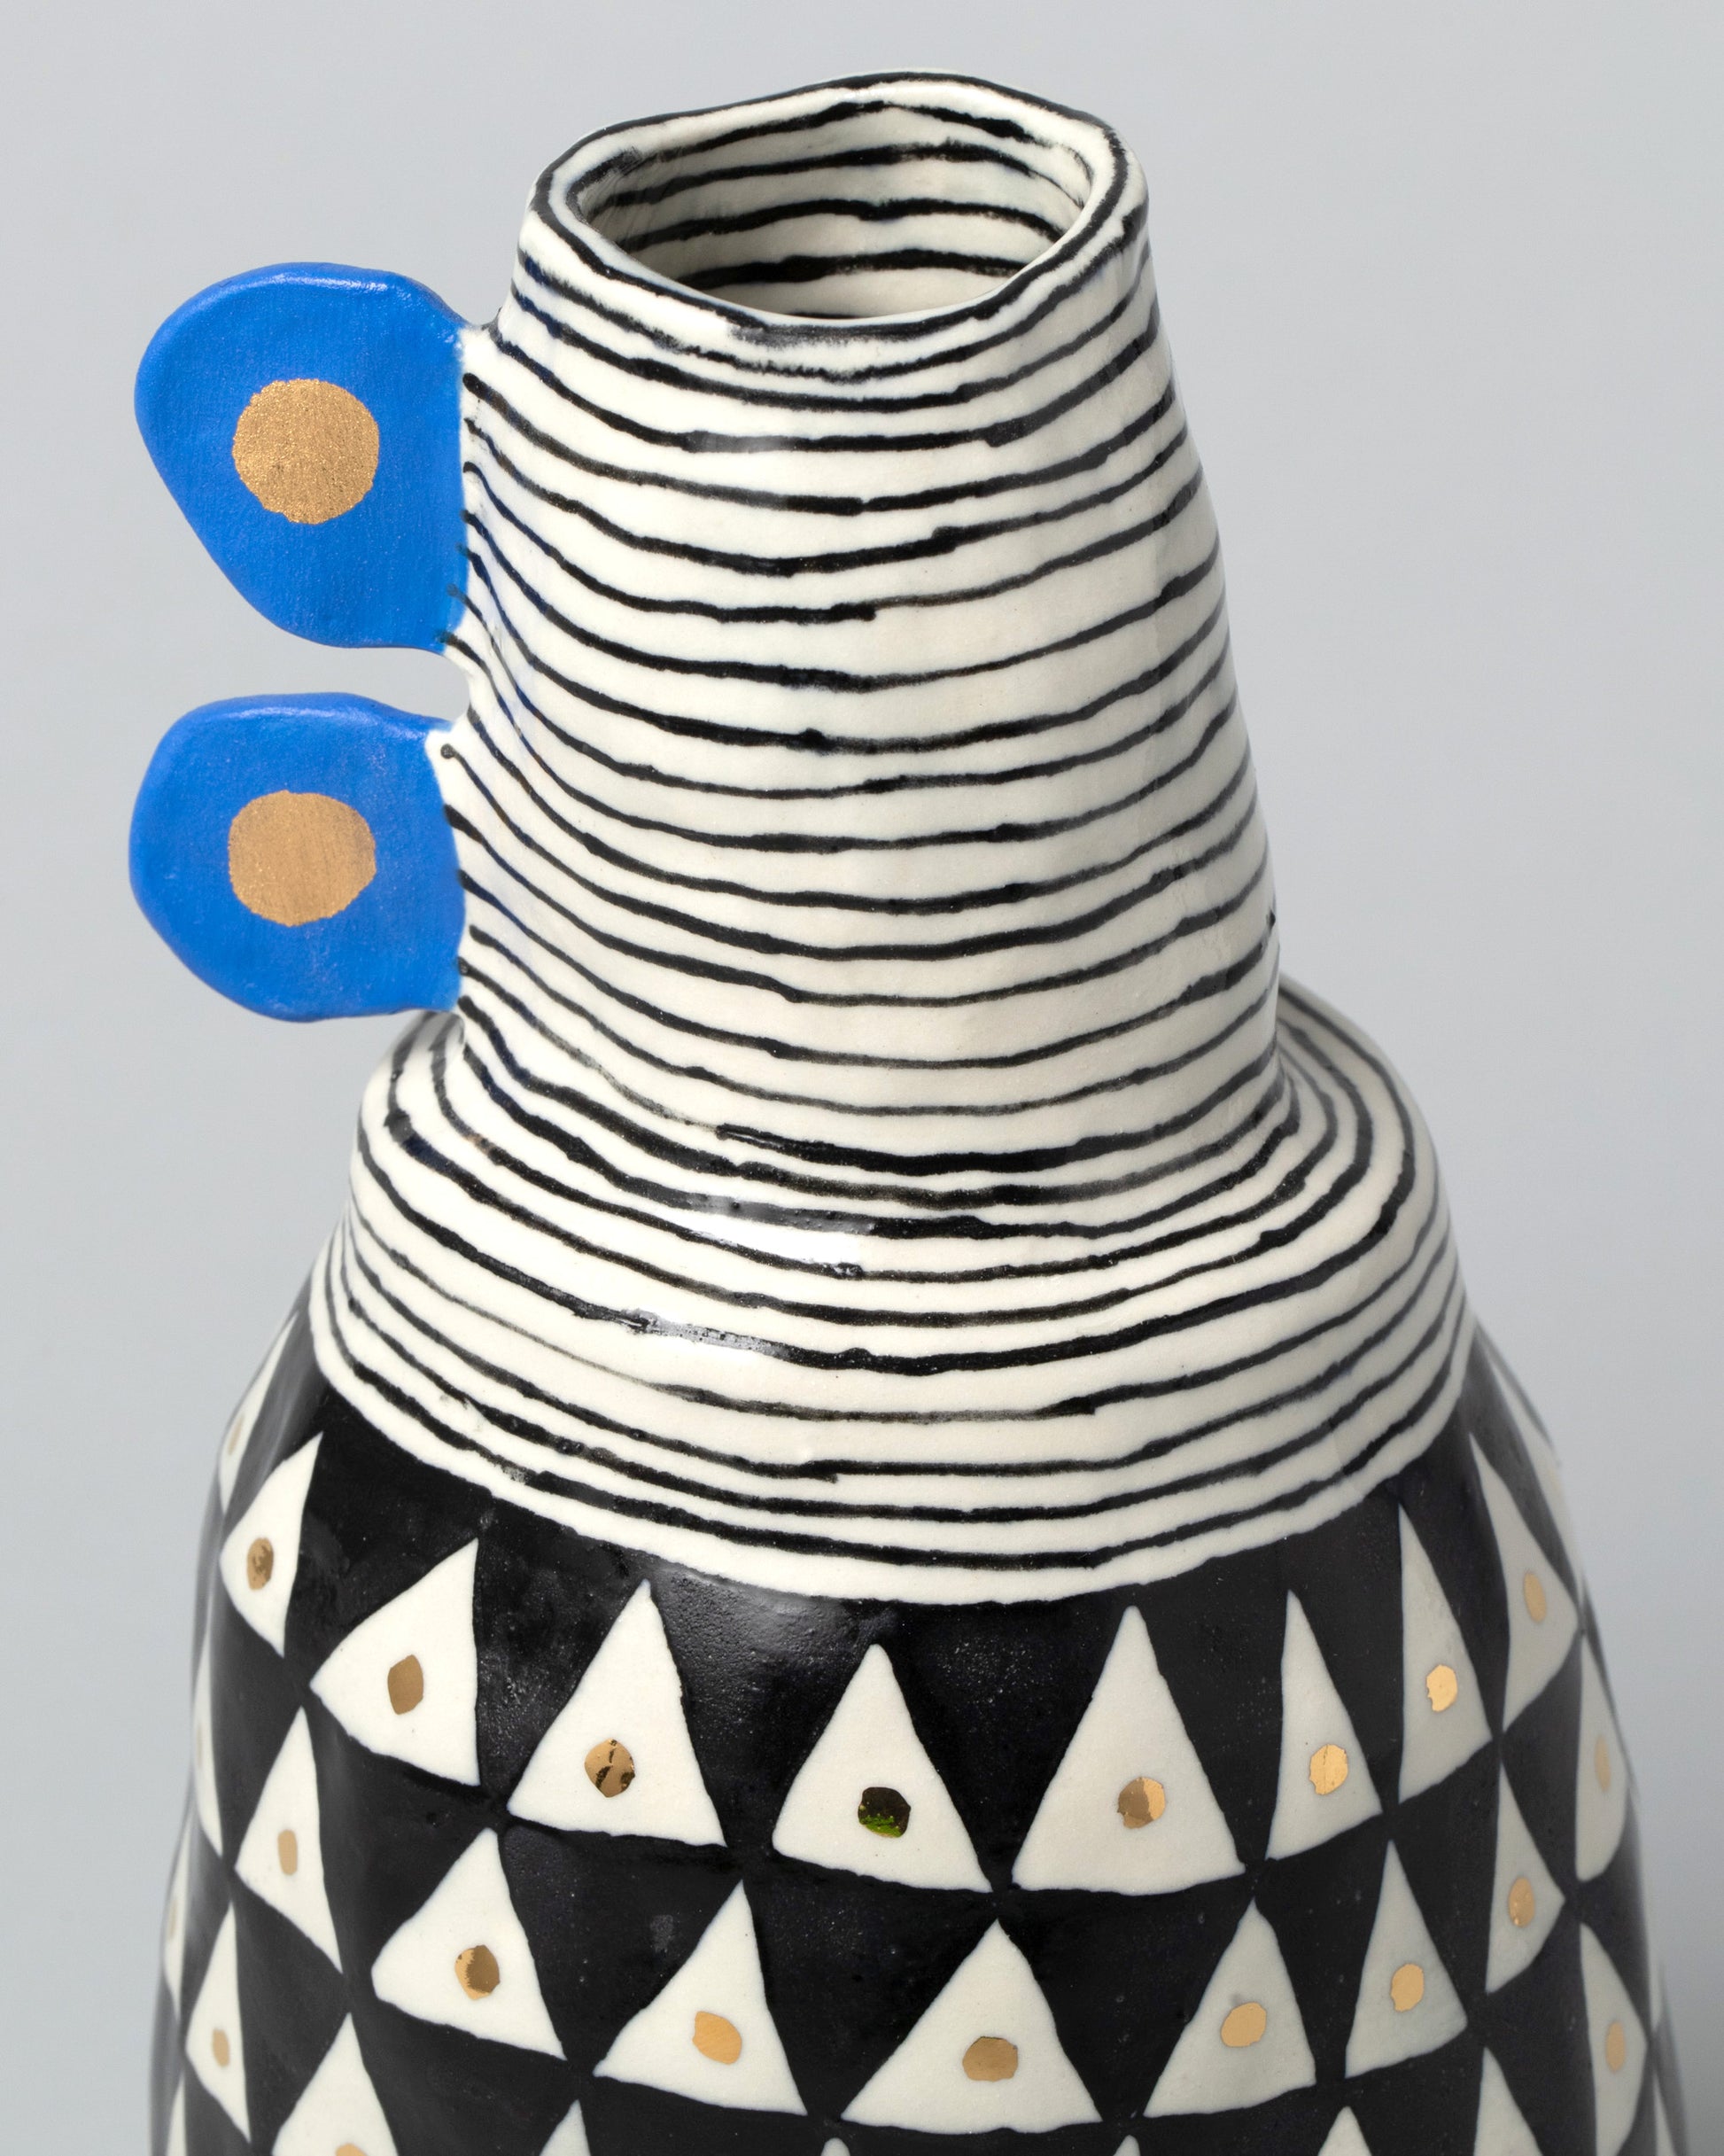 Closeup detail of the Suzanne Sullivan Tall Vase With Blue Handles on light color background.